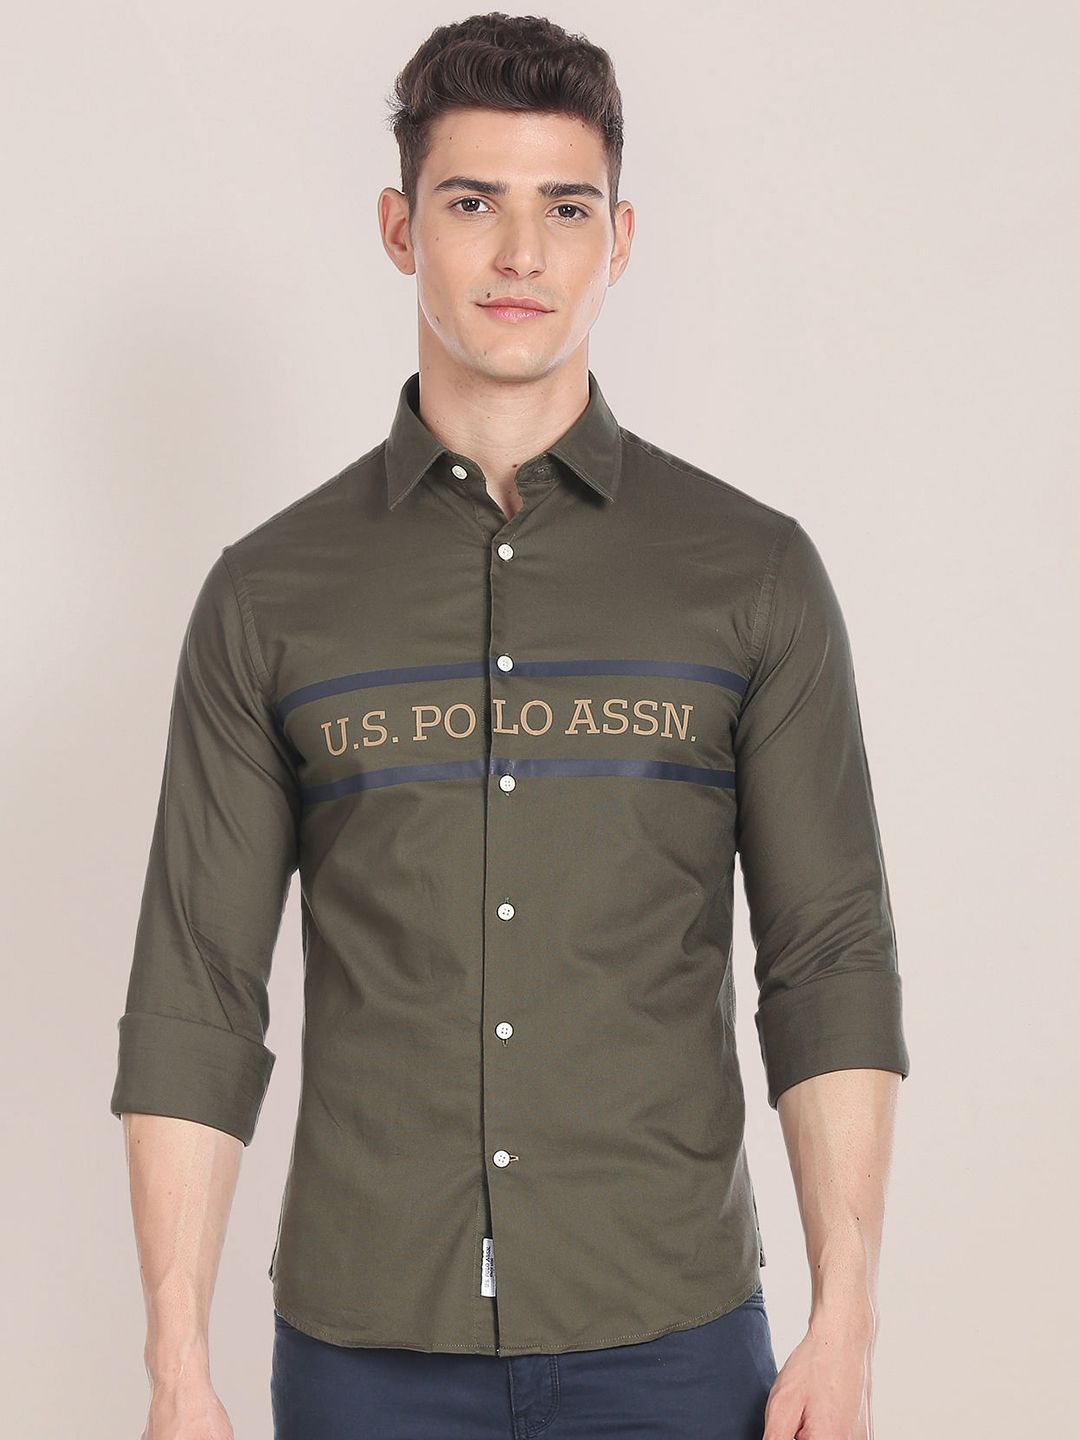 U.S. Polo Assn. Typography Printed Opaque Casual Shirt